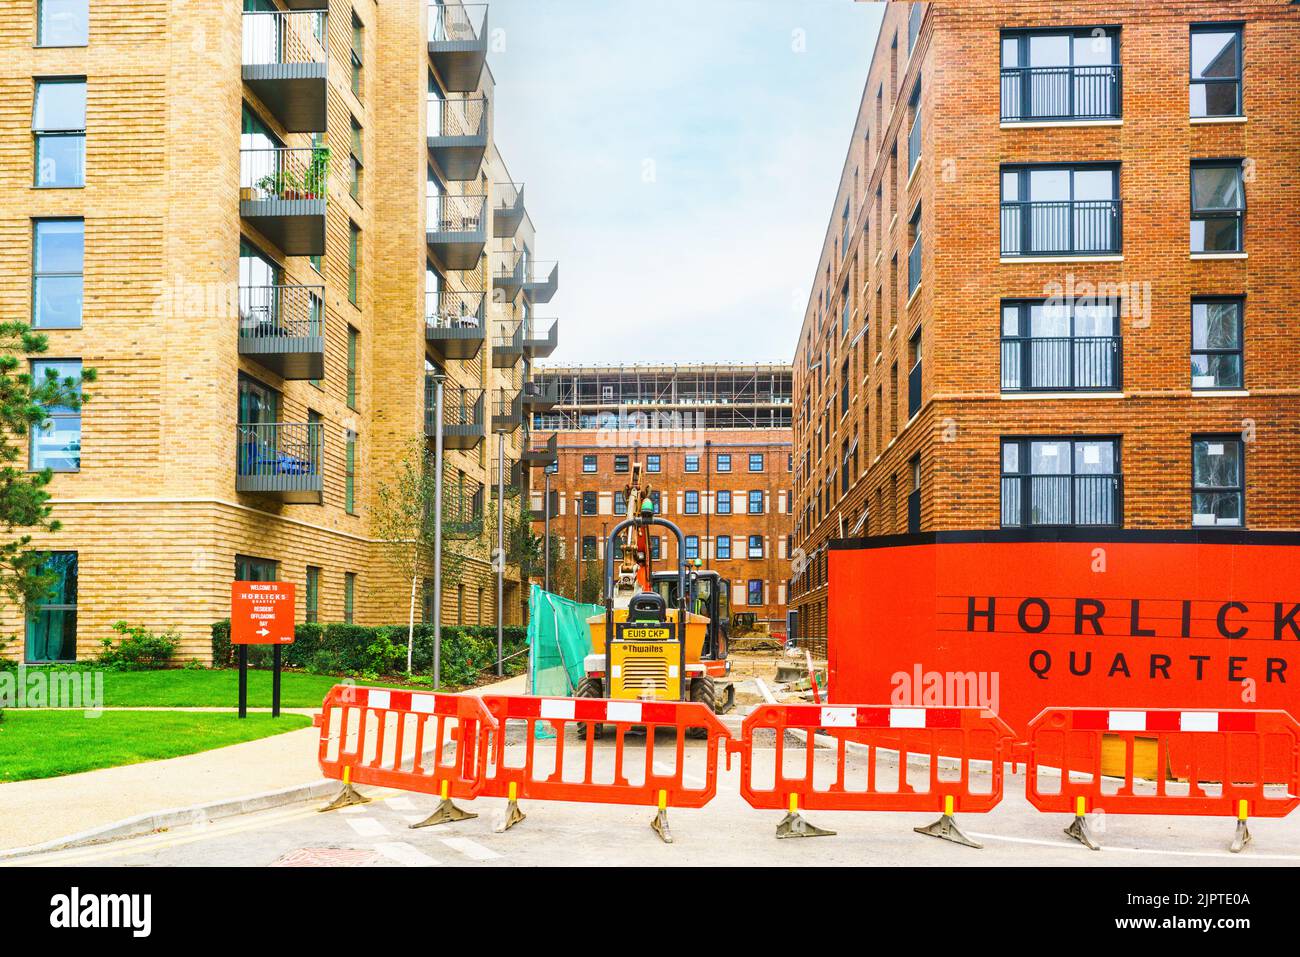 A new development in Slough, Berkshire on the site of the Horlicks Factory. Renamed the Horlicks Quarter, with the aim to create new communities. Stock Photo